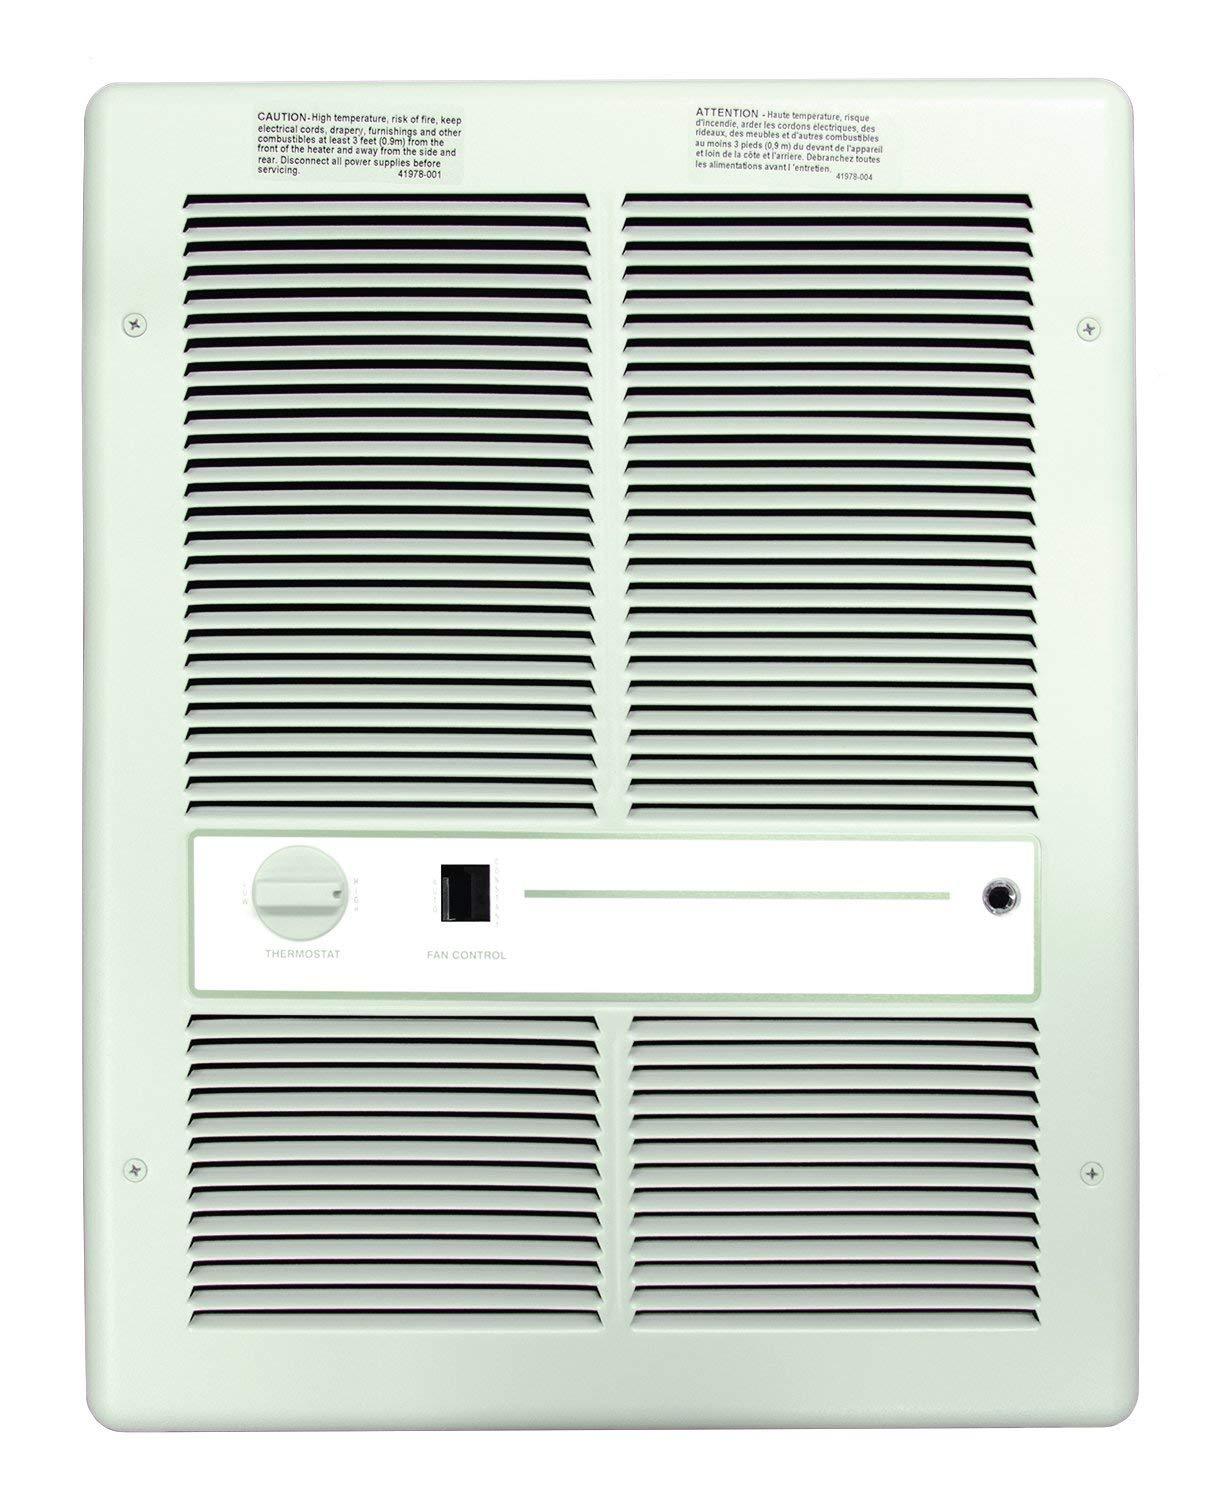 TPI 3000/2250W 240/208V 3310 Series Fan Forced Wall Heater (White) - With Summer Fan Switch - 1 Pole Thermostat - HF3315TSRPW